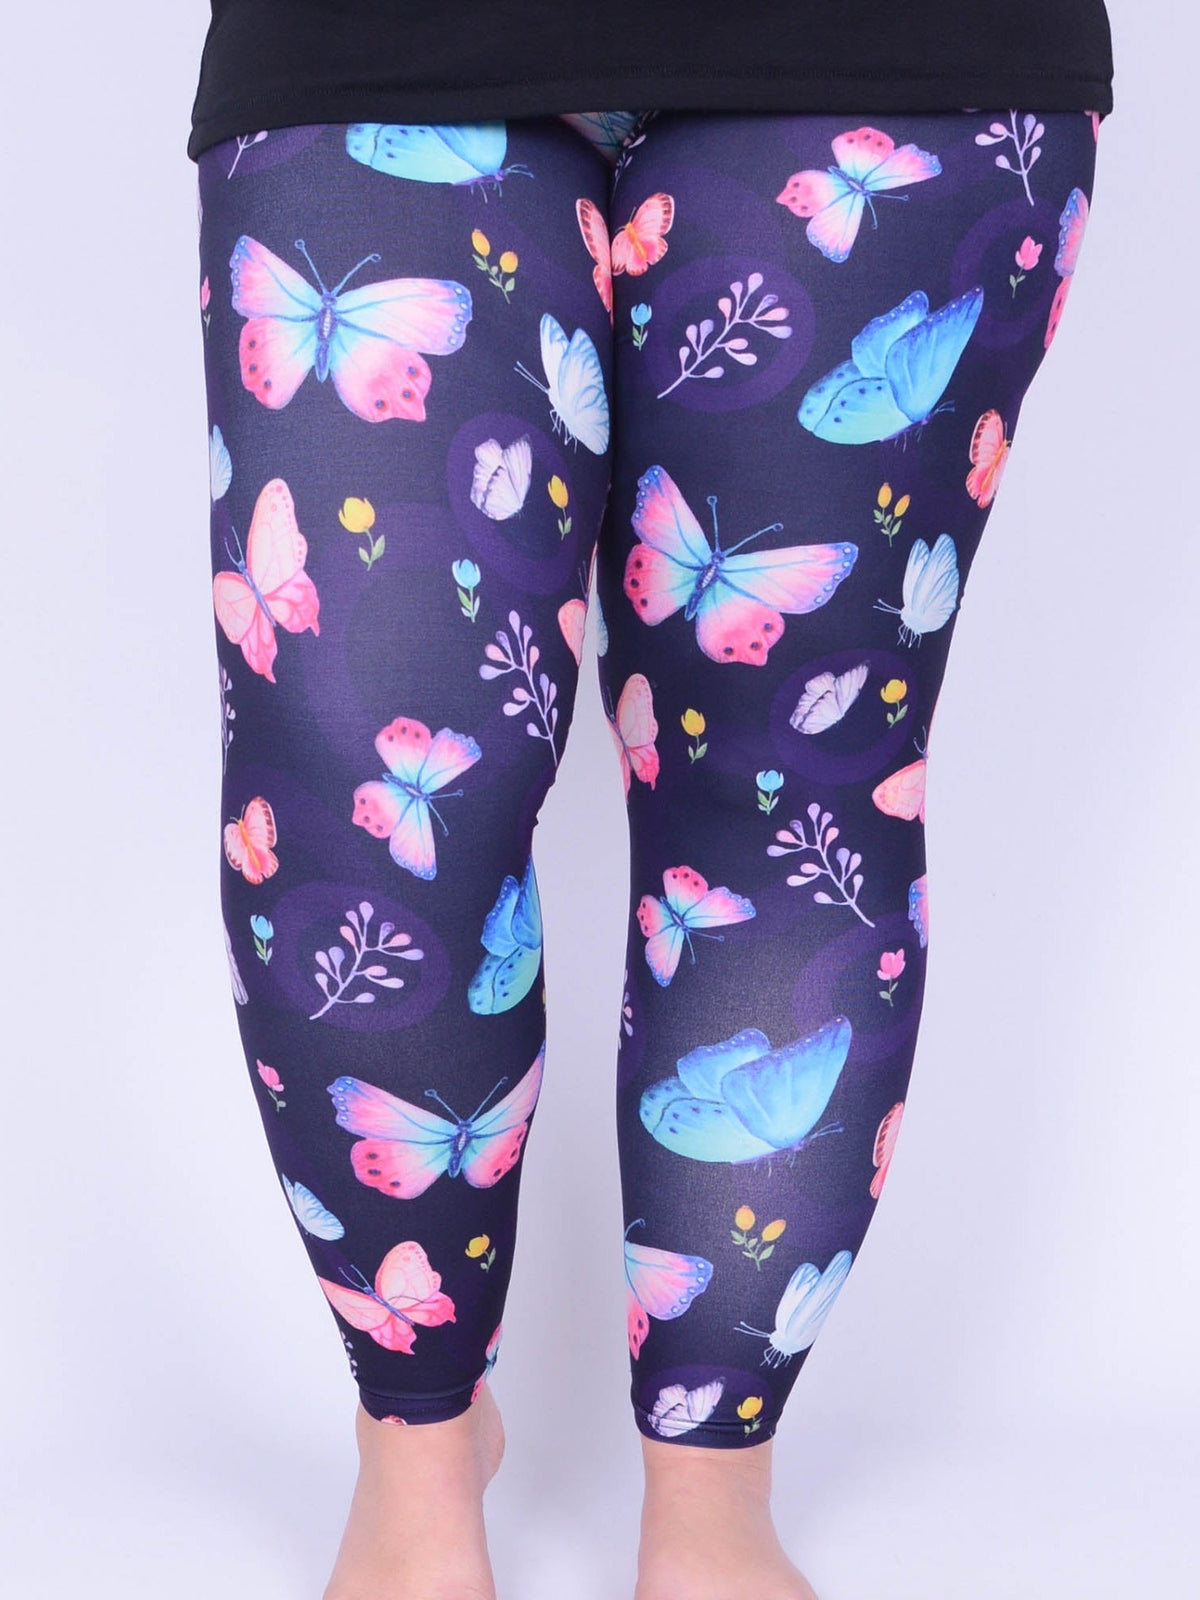 Leggings - Butterflies - L44, Trousers, Pure Plus Clothing, Lagenlook Clothing, Plus Size Fashion, Over 50 Fashion